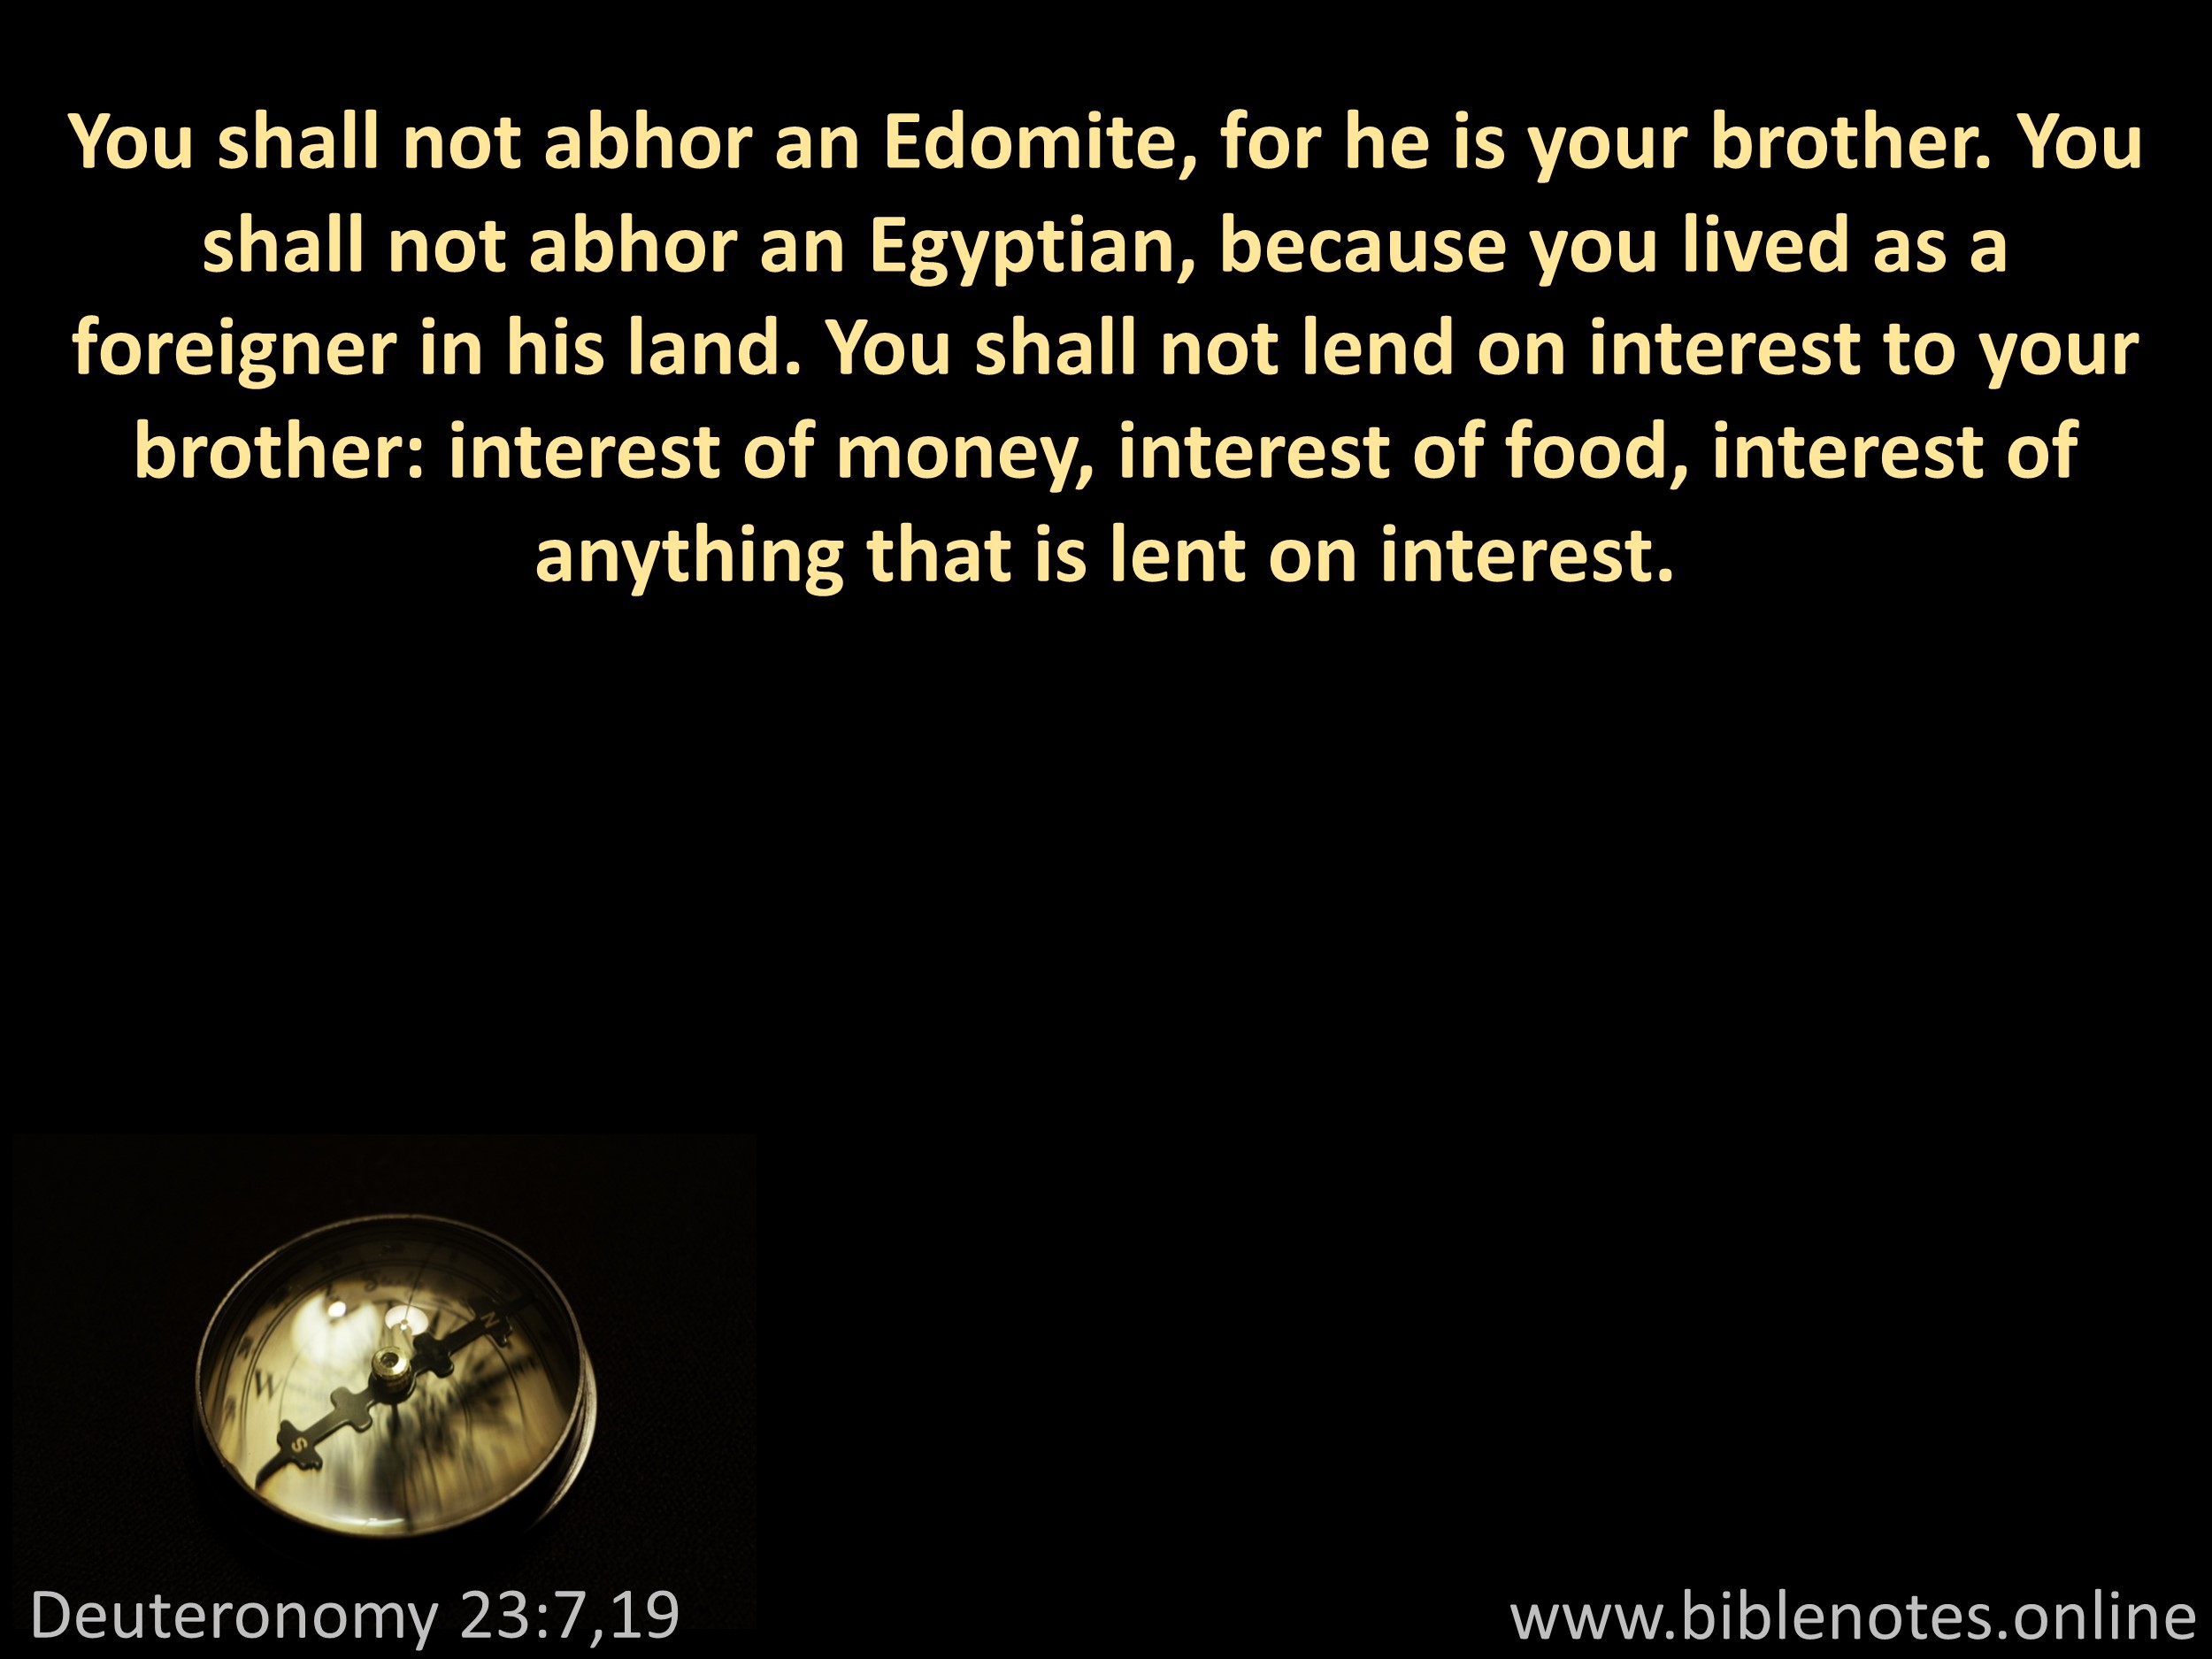 Bible Verse from Deuteronomy Chapter 23